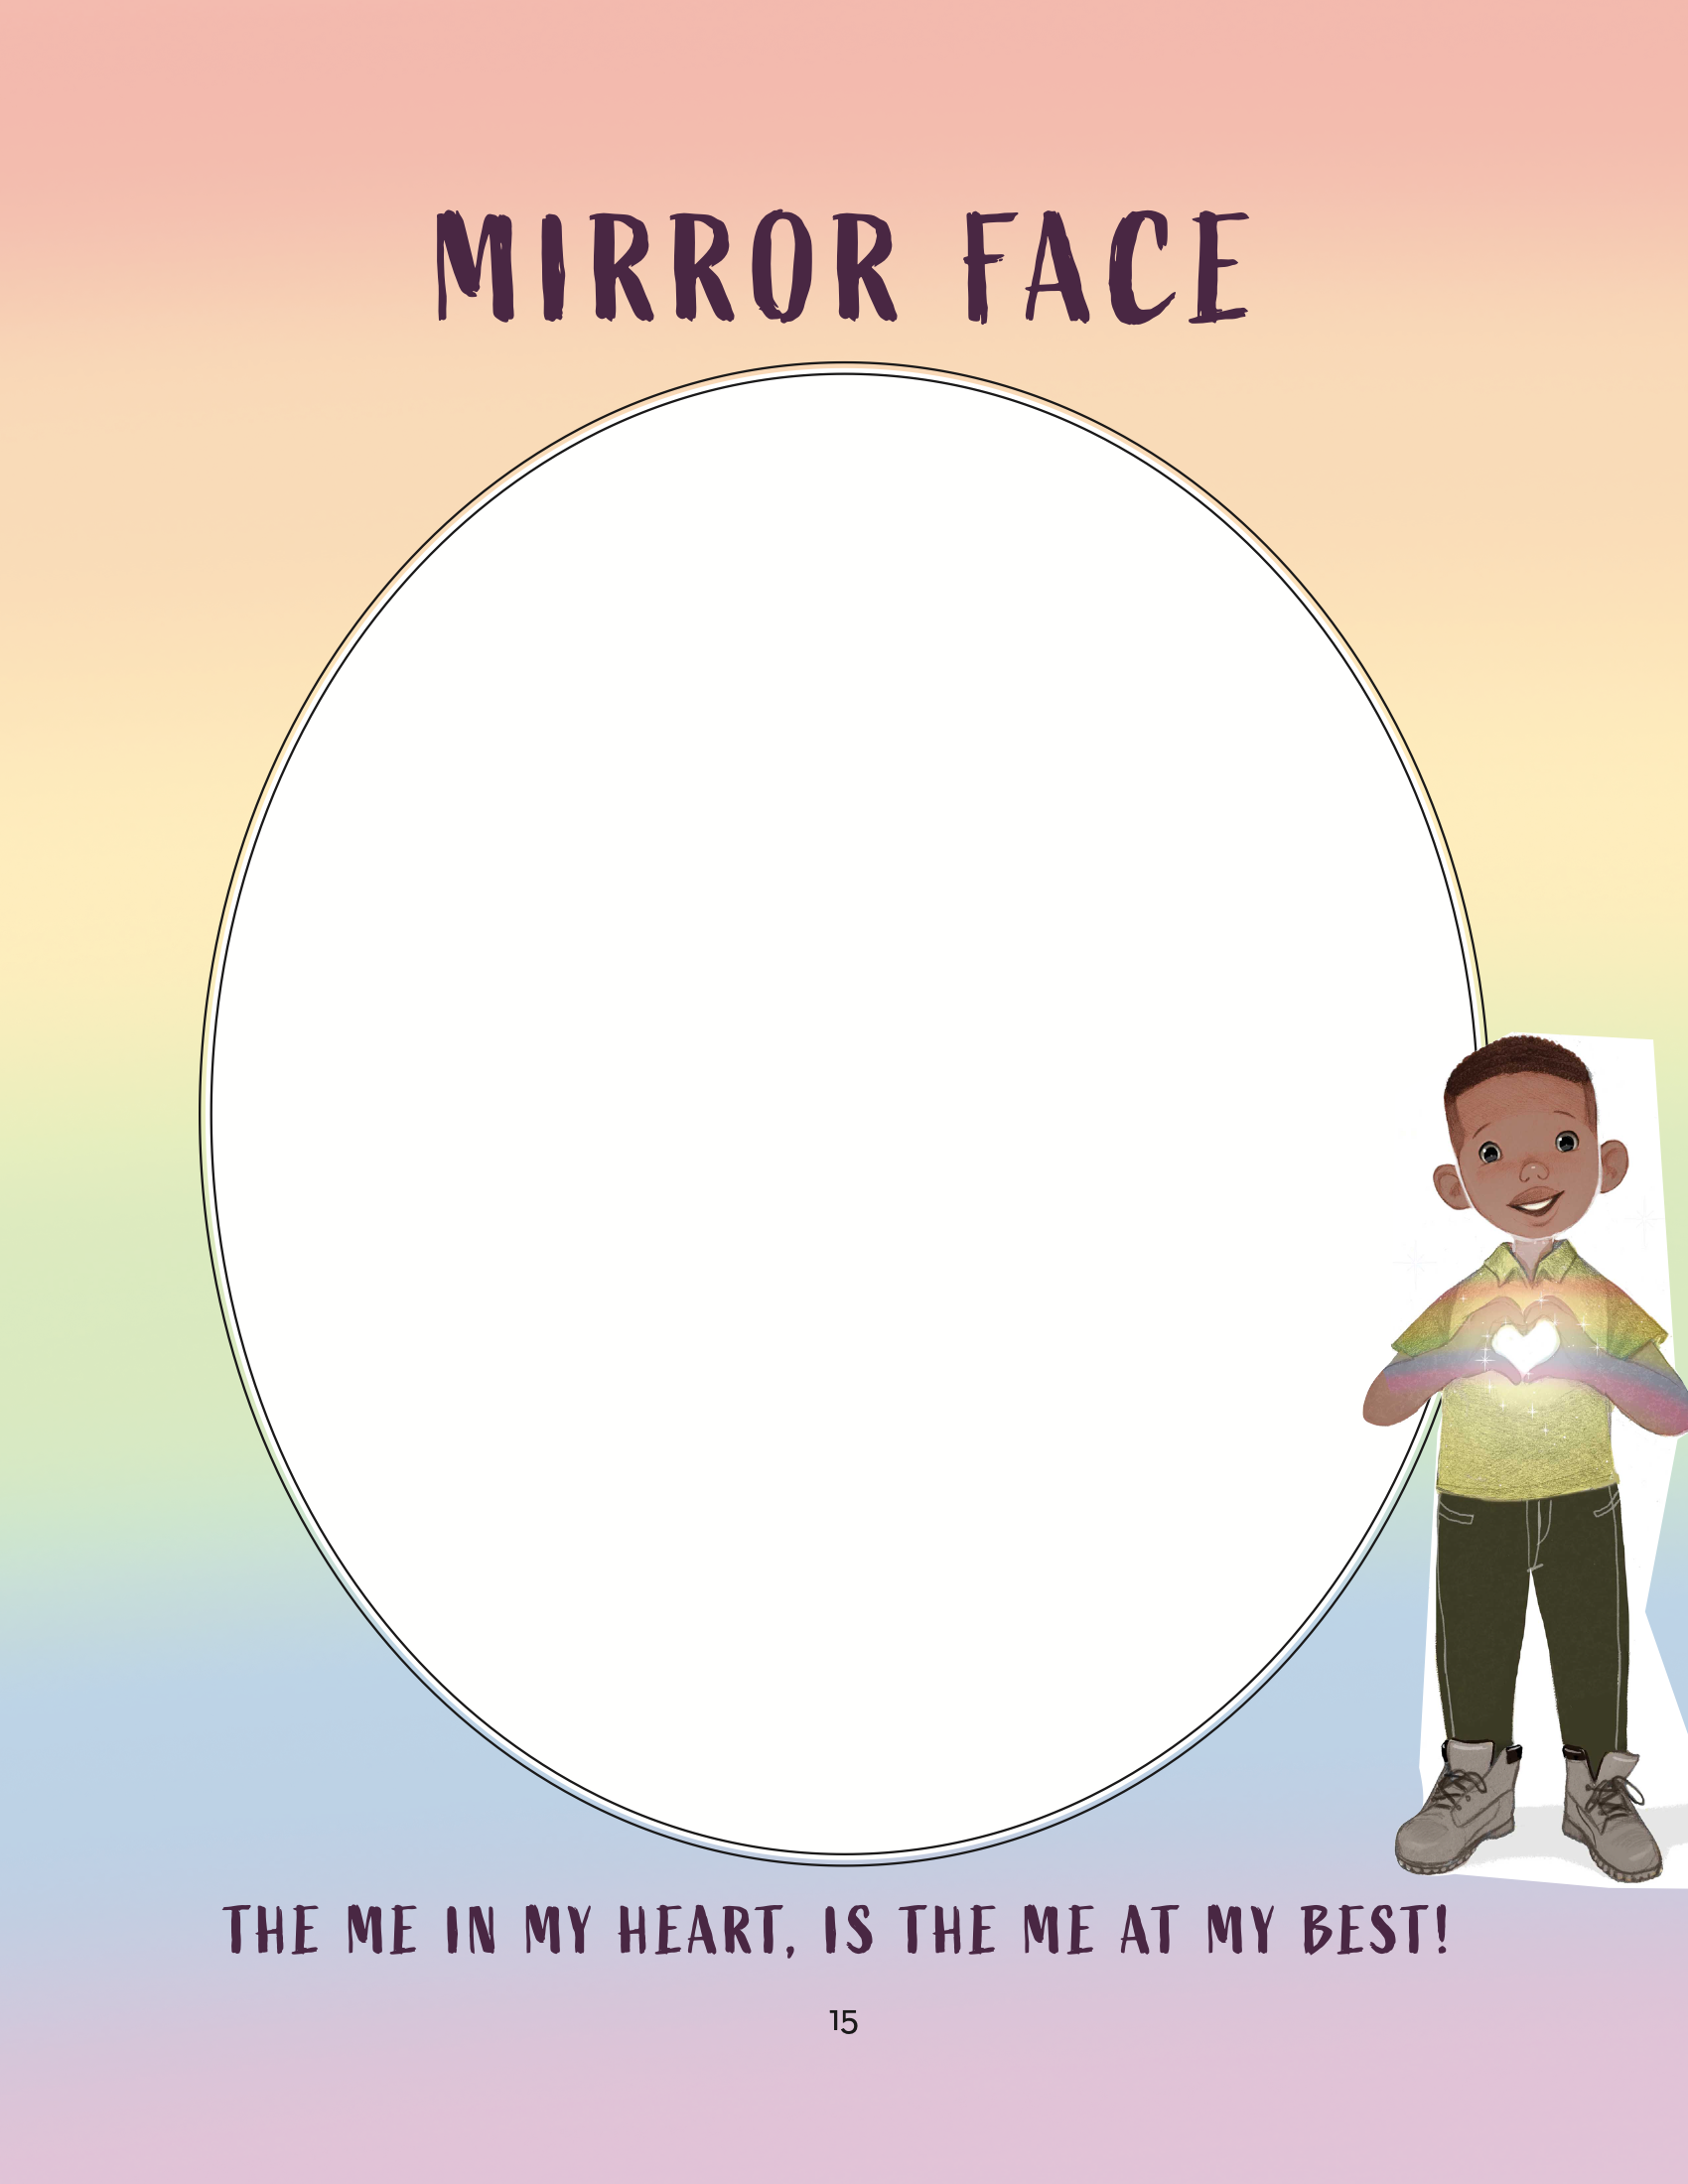 Mirror Face Teaching Guide_7_27_22 15-15.png